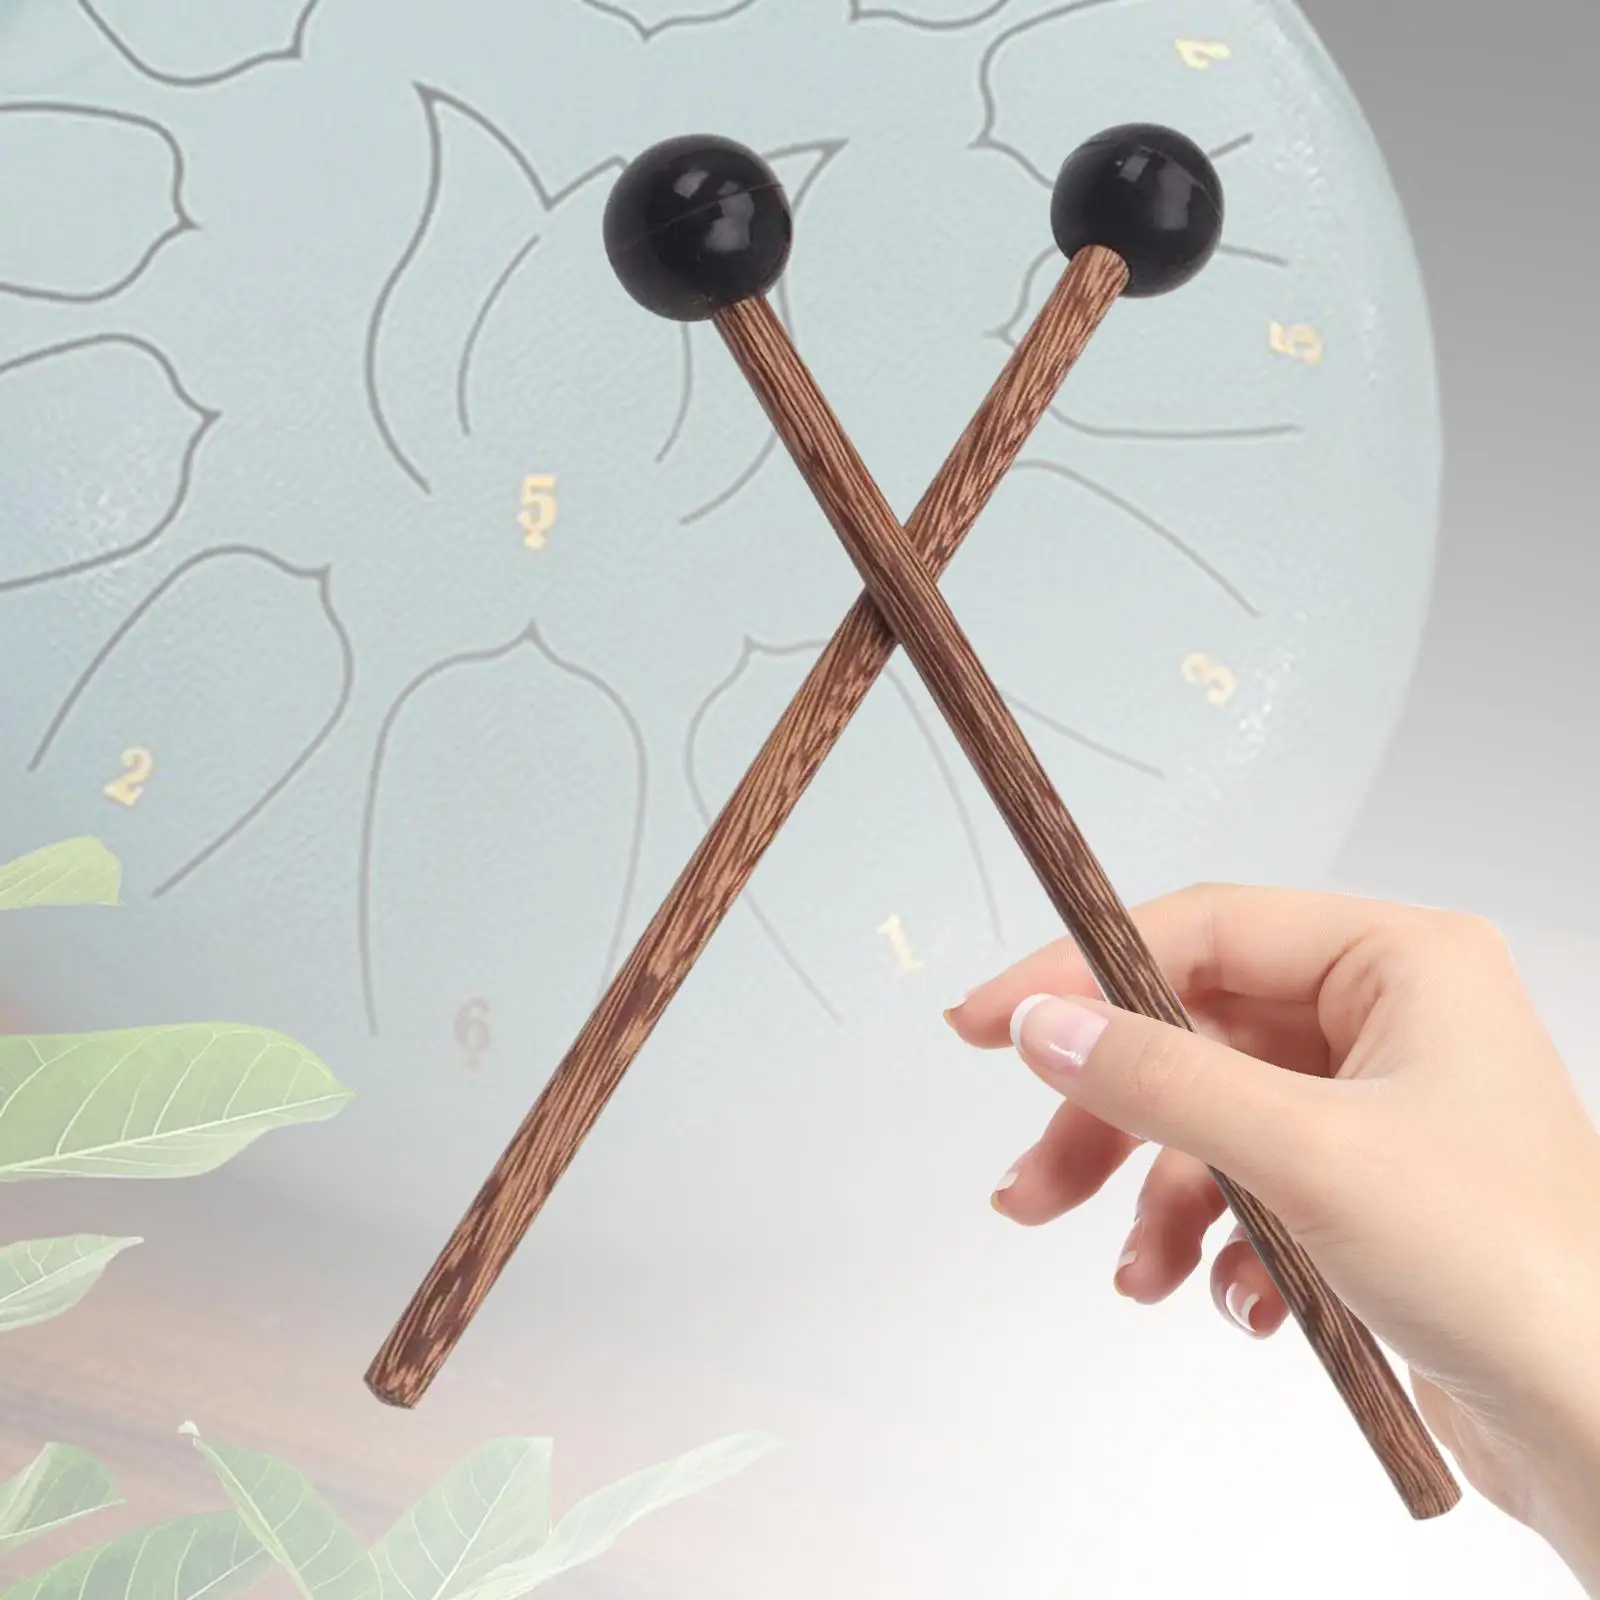 2x Drumsticks Wooden Mallet Percussion Accessories 18cm Length Xylophone Mallet for Xylophone Bell Chime Ethereal Drum Woodblock